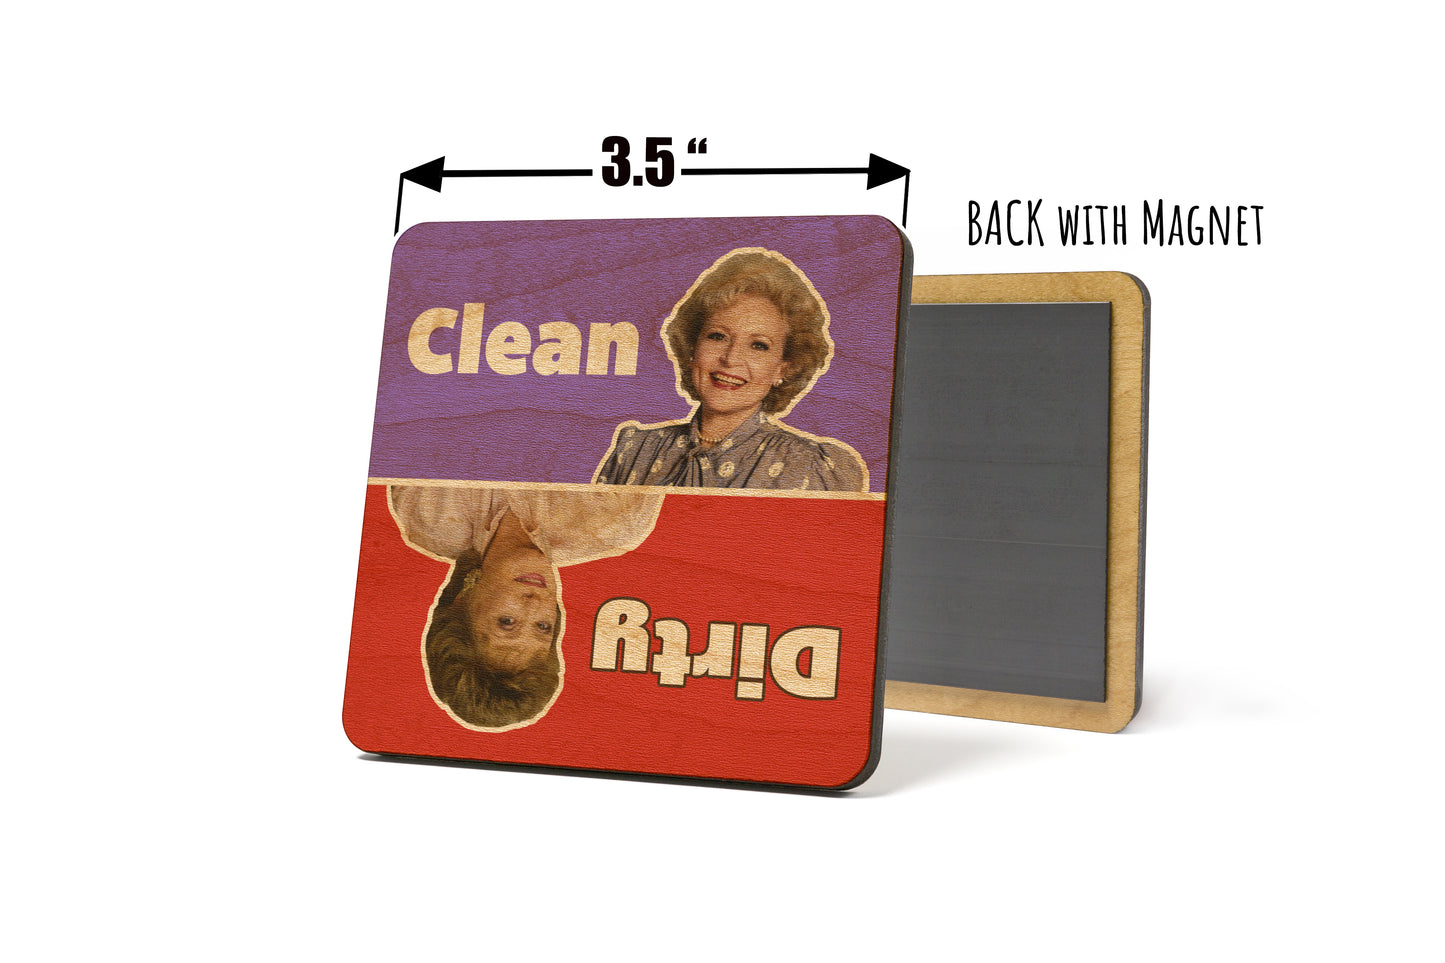 Golden Girls - Blanche and Rose Dirty Clean Dishwasher Magnet